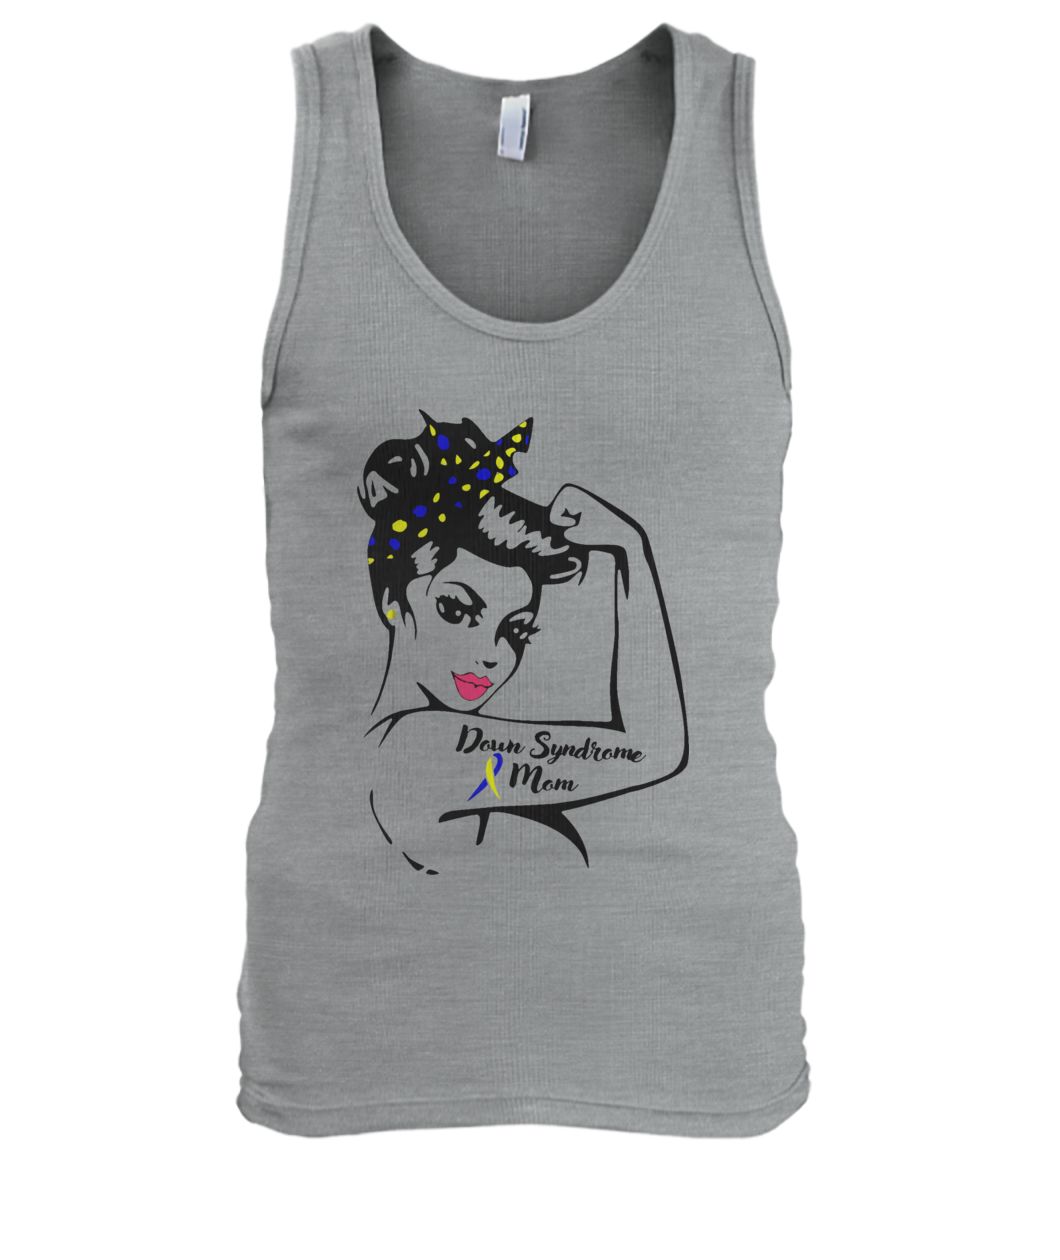 Down syndrome mom men's tank top